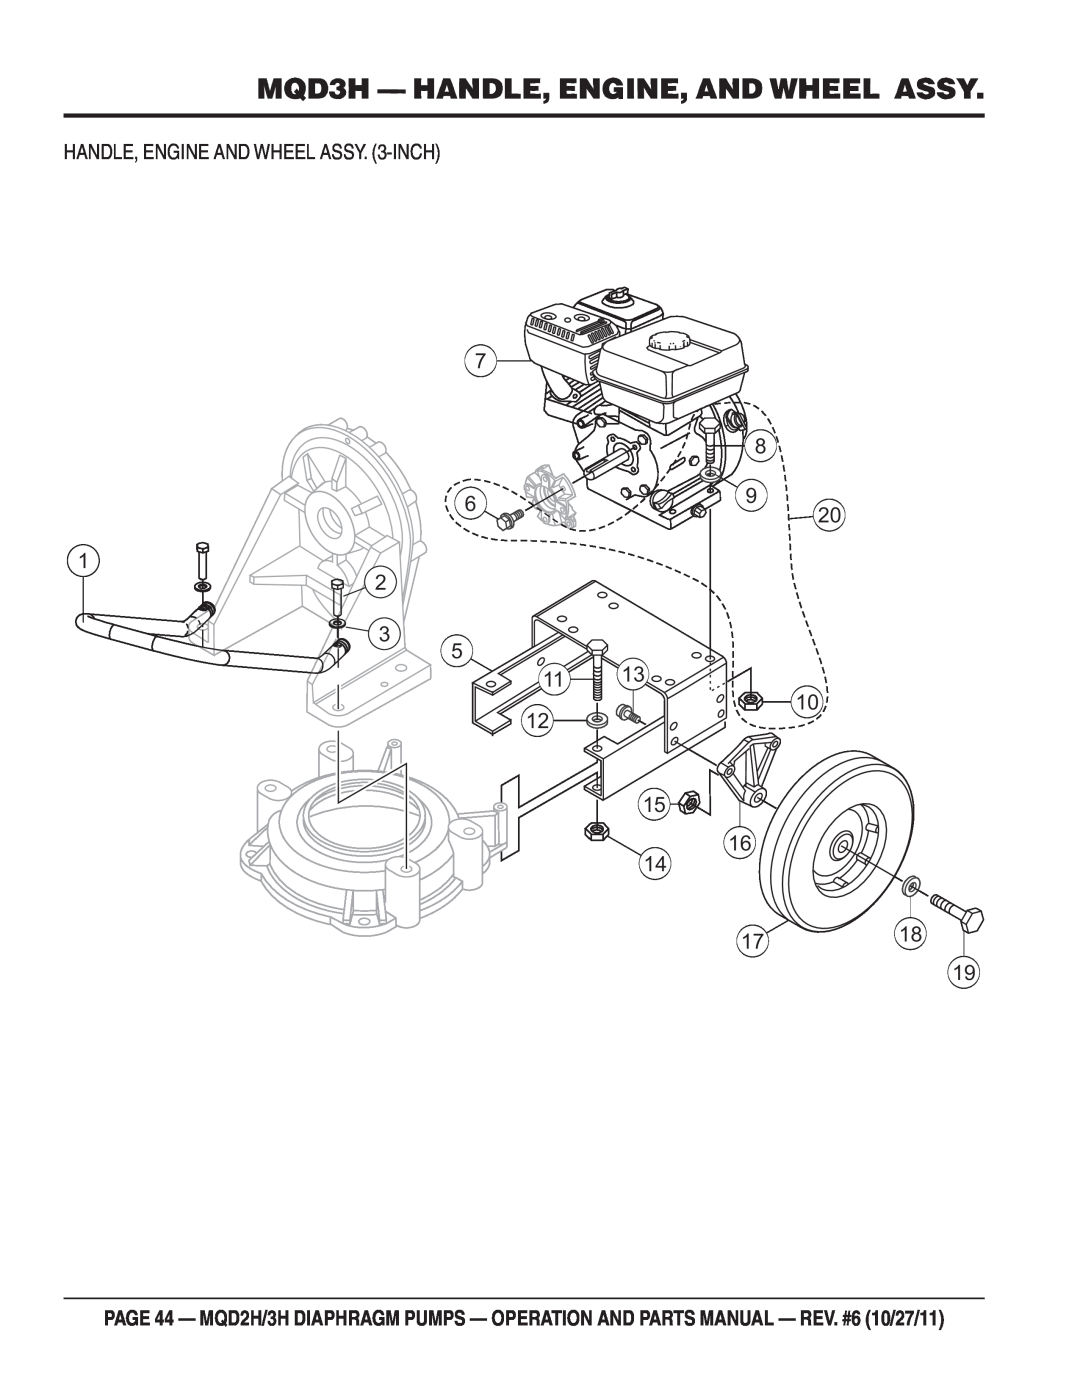 Multiquip MQD2H manual 7 6 1 2, HANDLE, ENGINE AND WHEEL ASSY. 3-INCH, MQD3H - HANDLE, ENGINE, AND WHEEL ASSY 